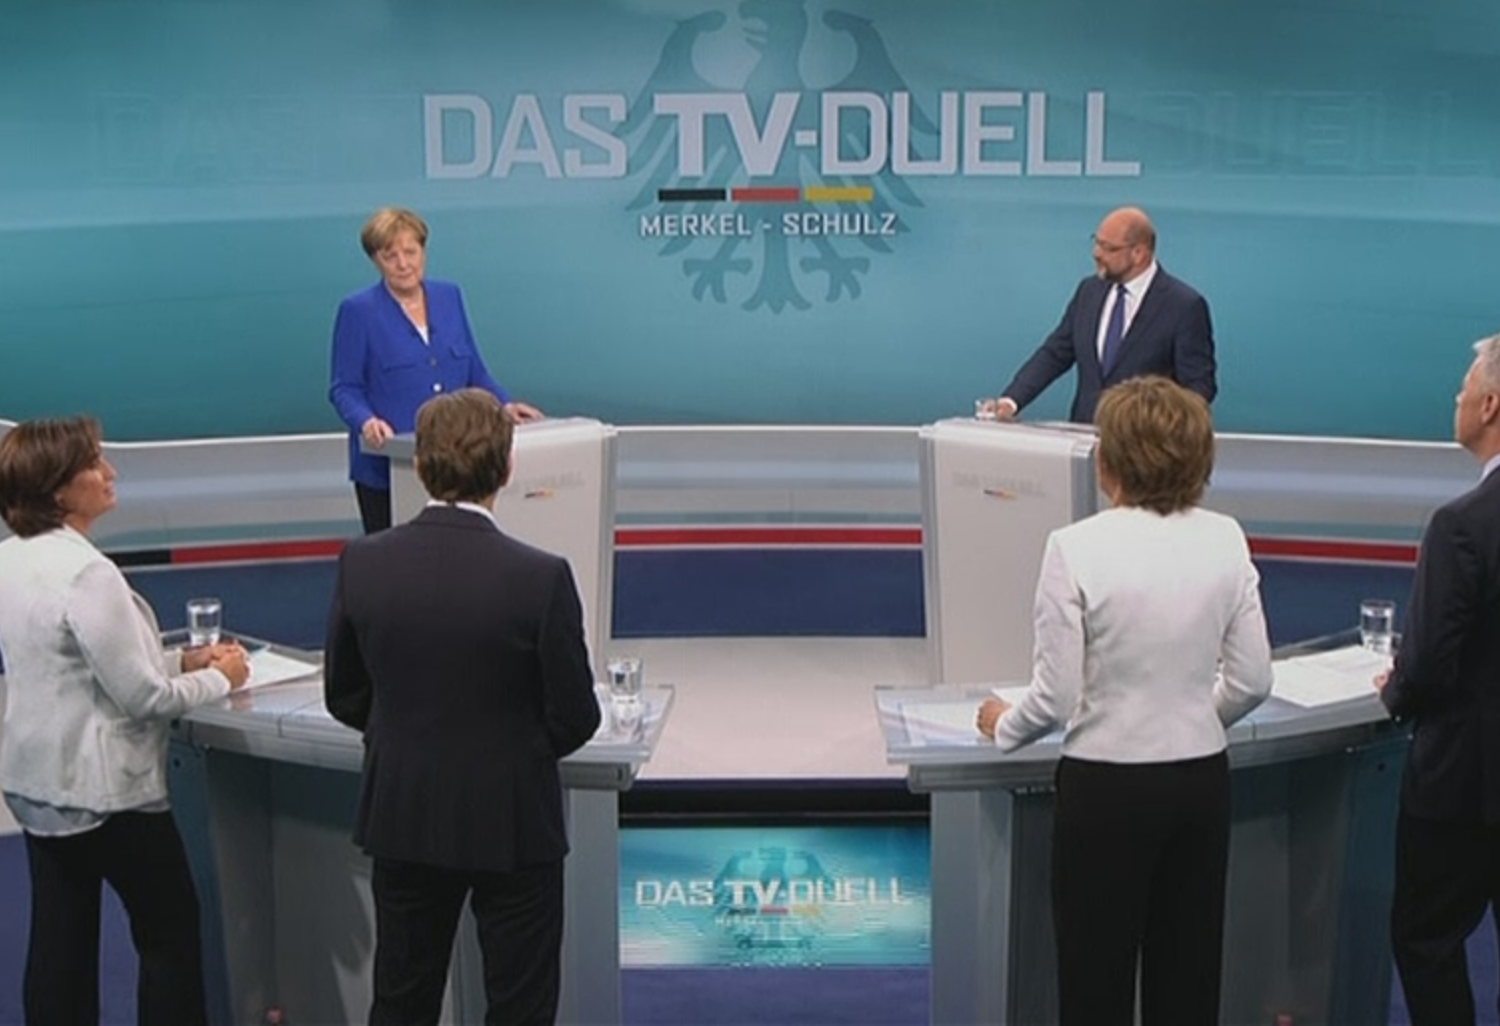 Above all summits, it is calm. German elections between crisis and stagnation